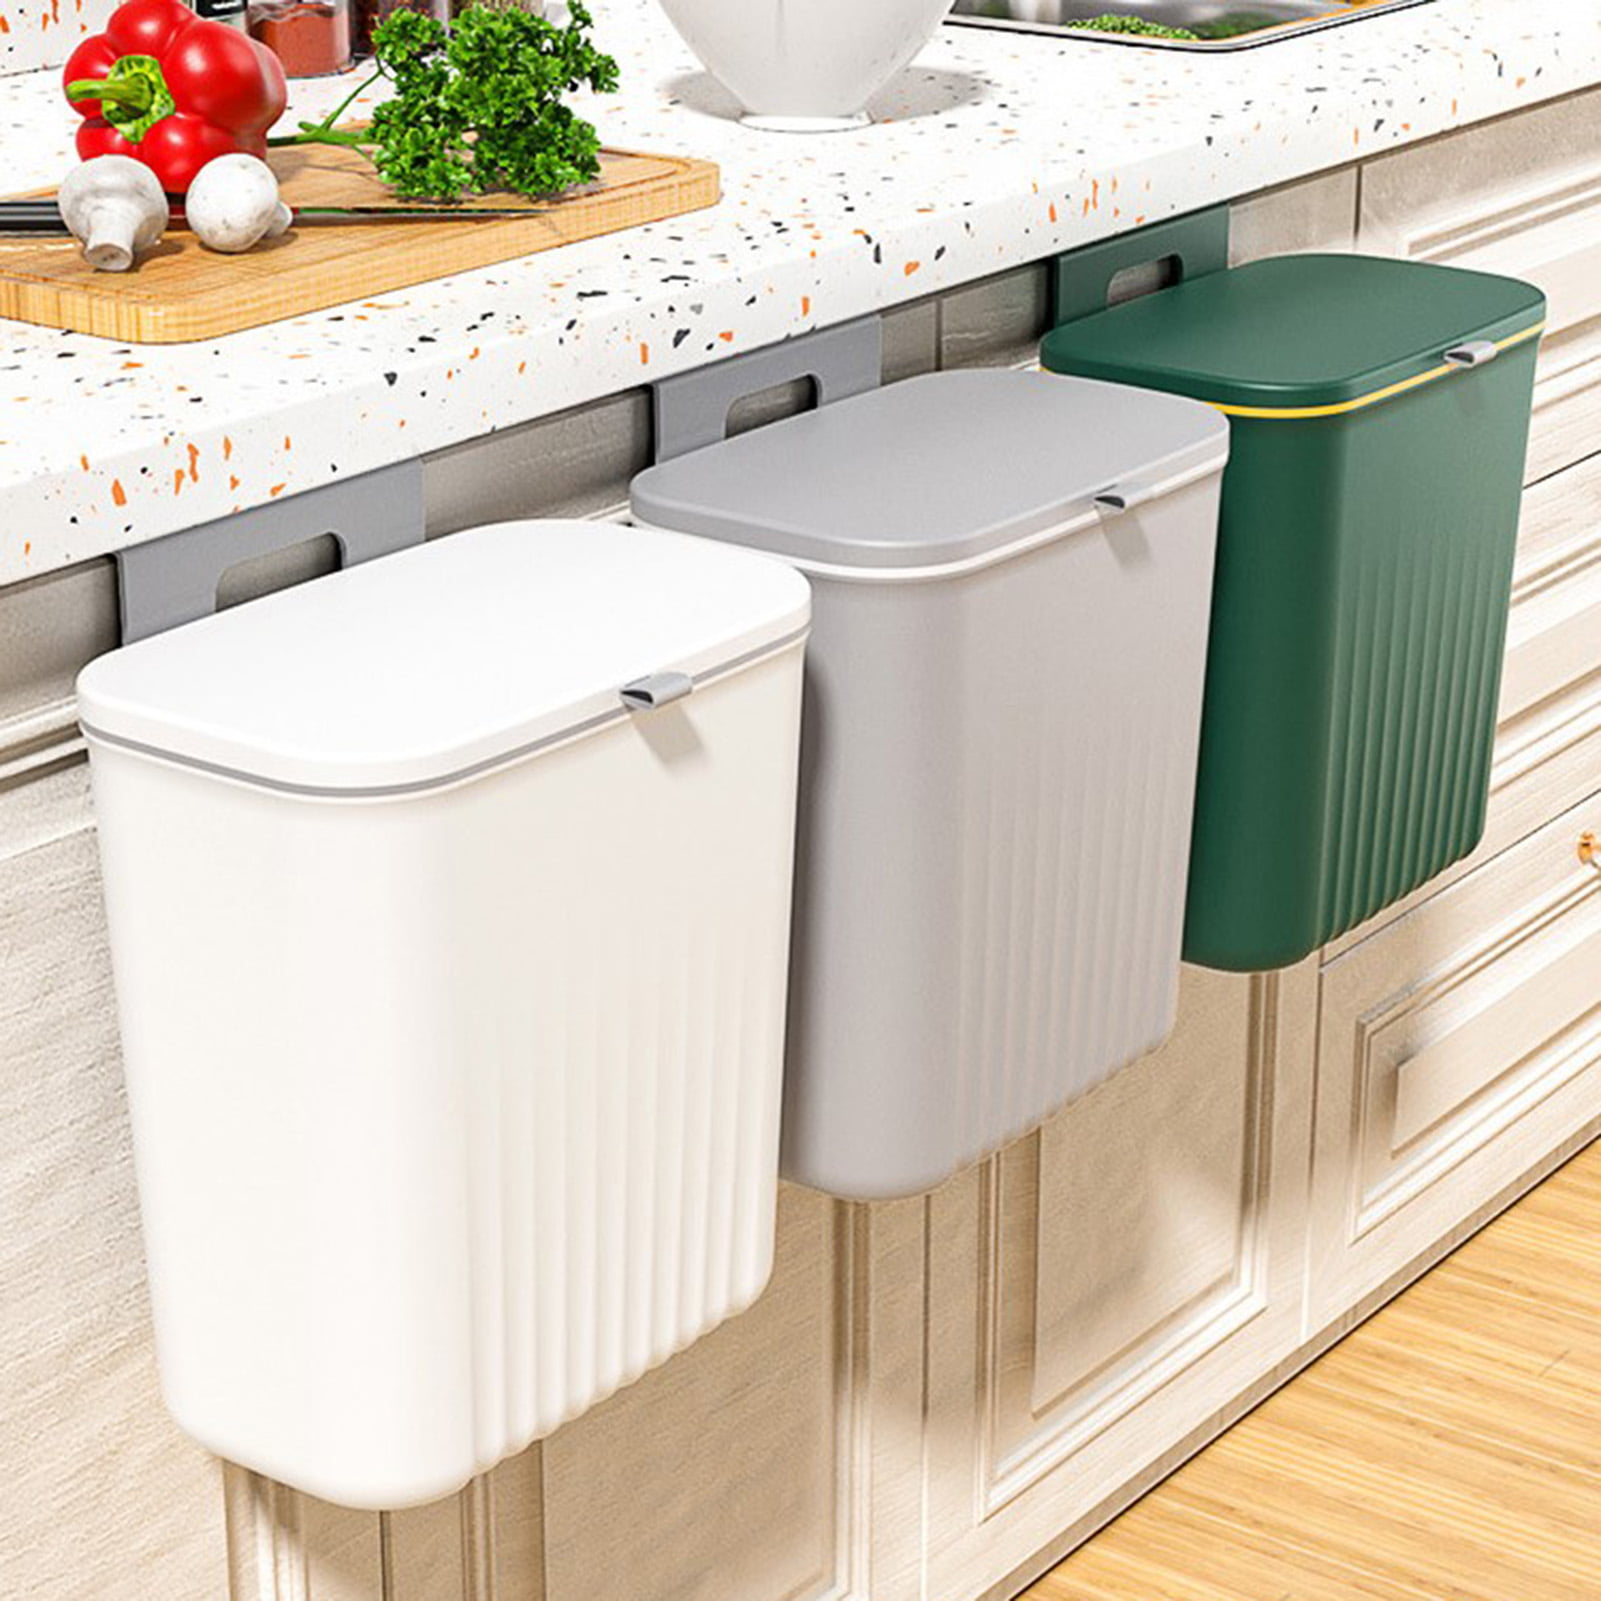 Tiyafuro 2.4 Gallon Kitchen Compost Bin for Counter Top or Under Sink, Hanging Small Trash Can with Lid for Cupboard/Bathroom/Bedroom/Office/Camping